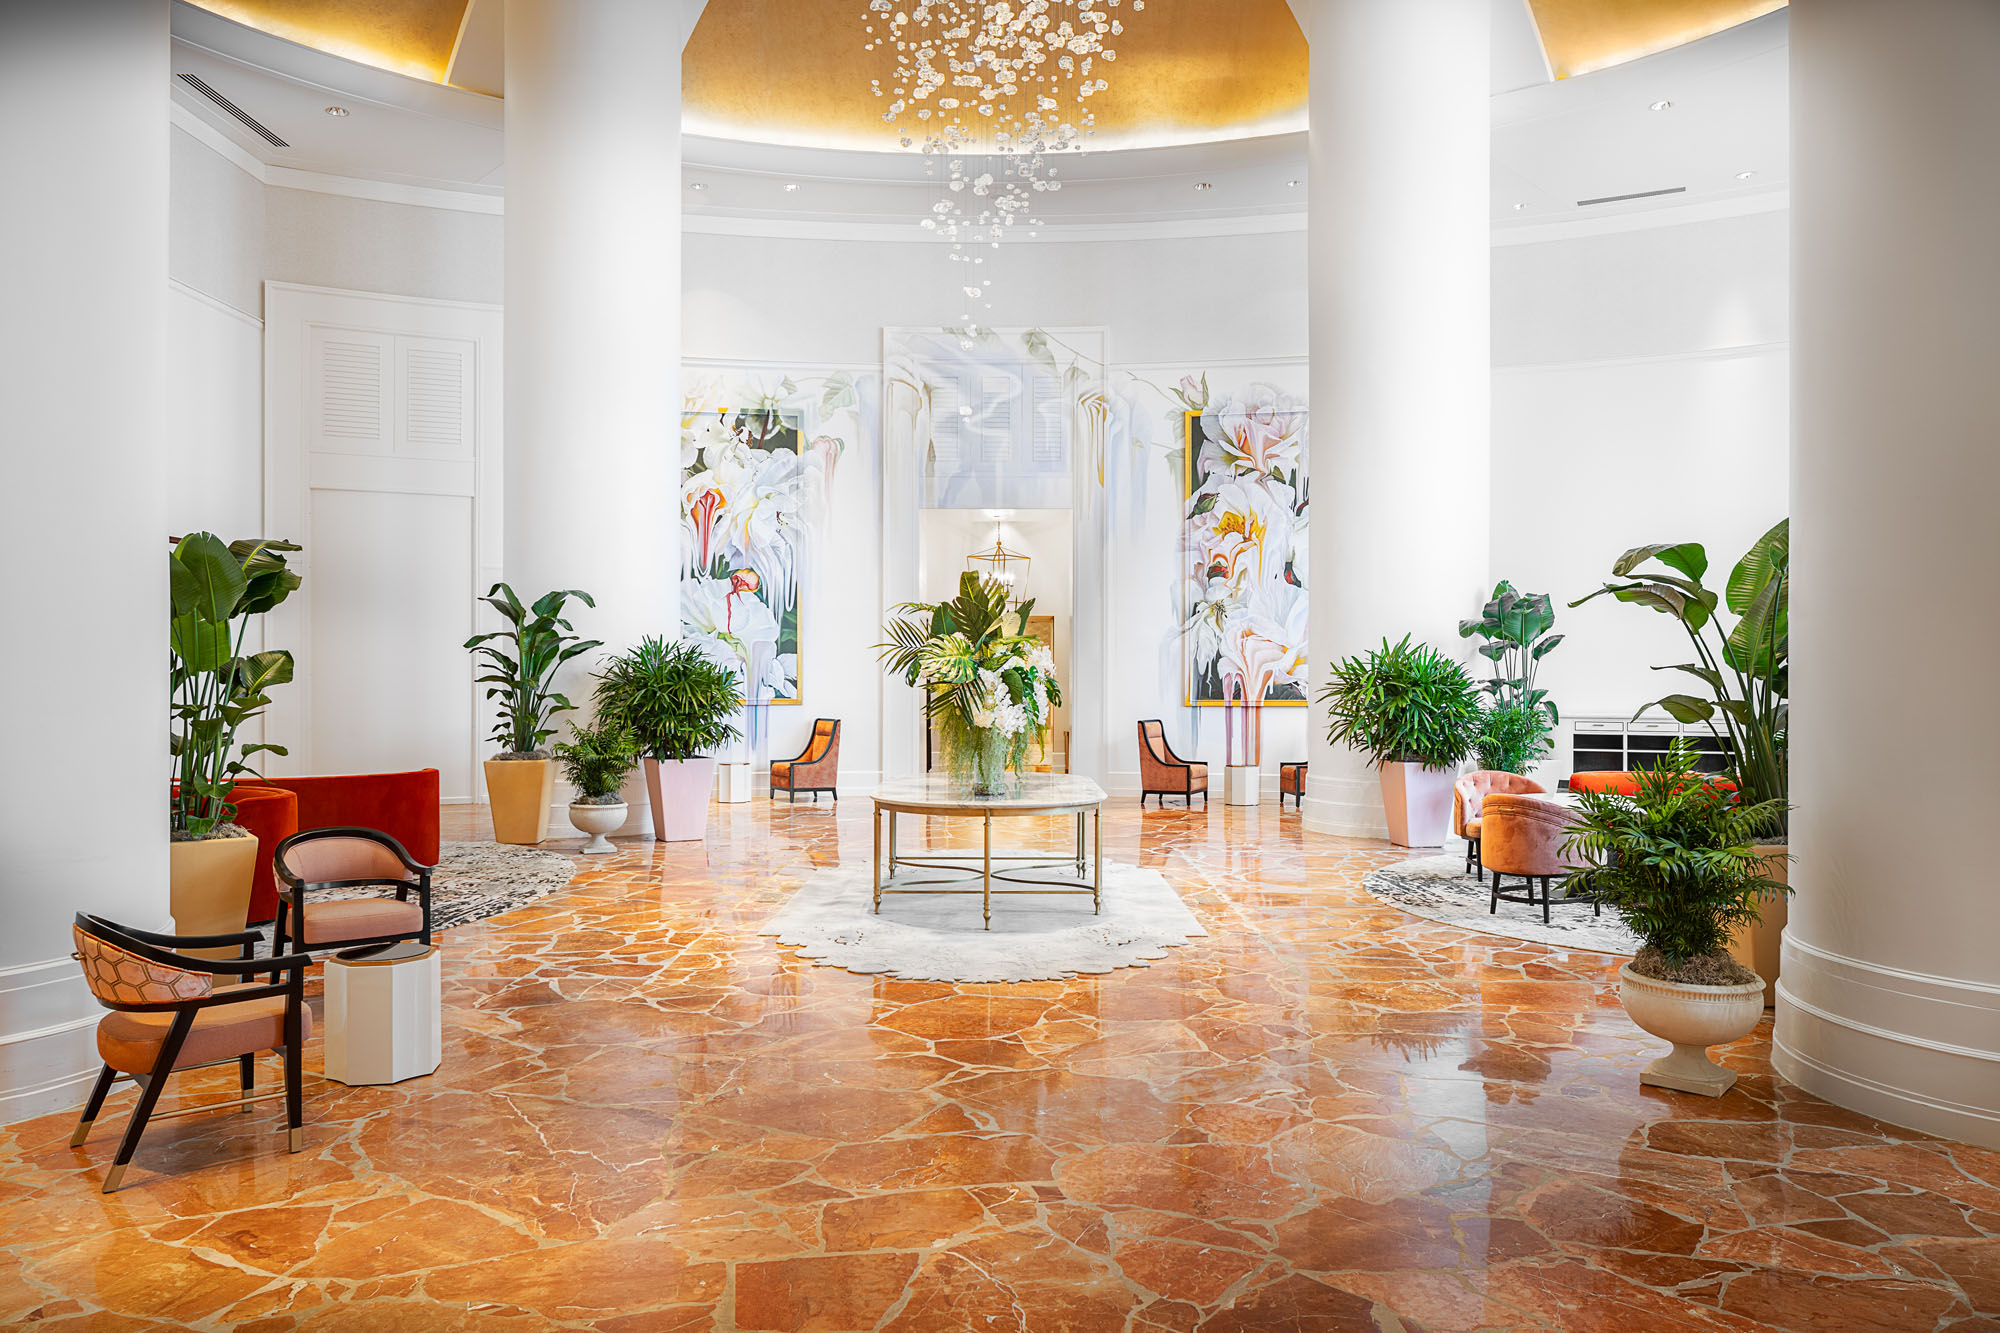 interior image of a hotel lobby with marble floors and white walls